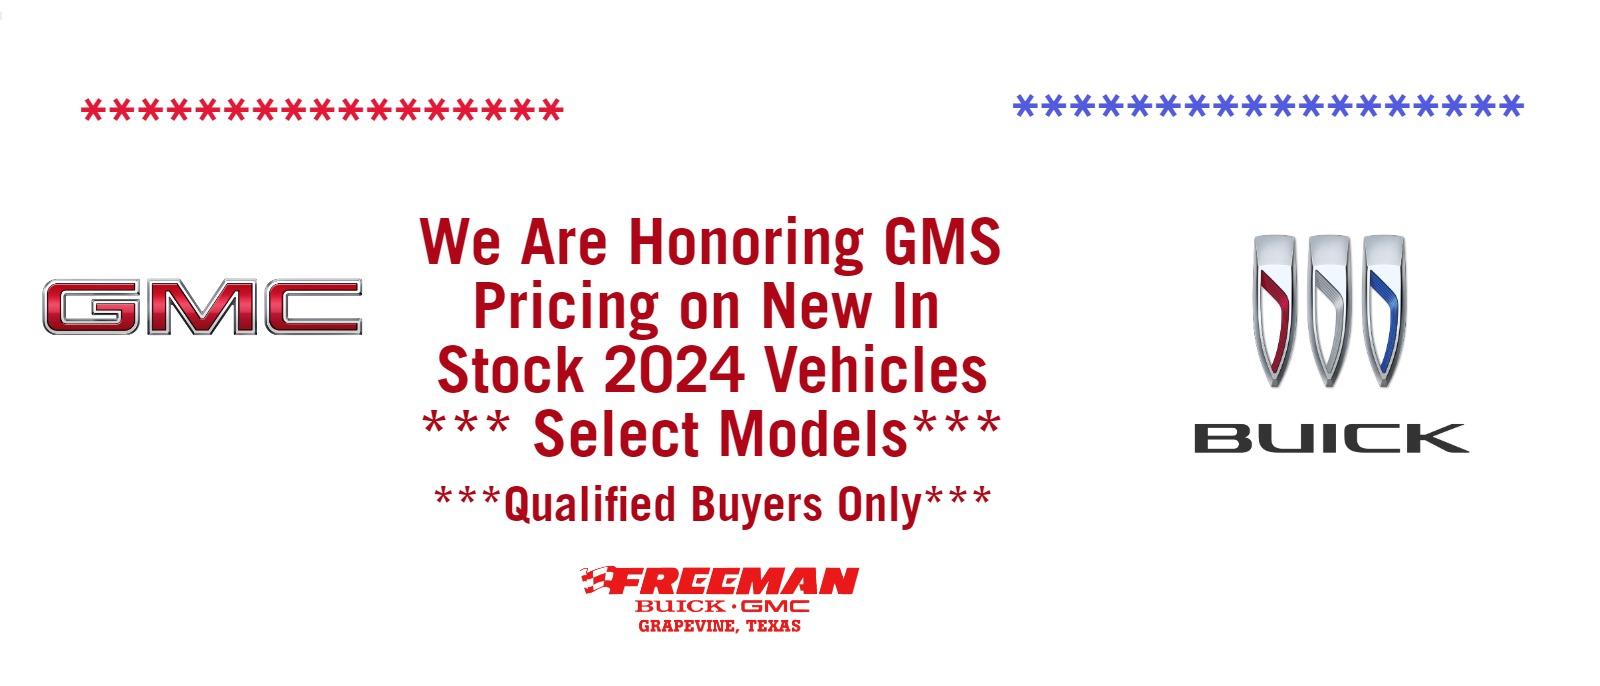 GMS Pricing for qualified buyers